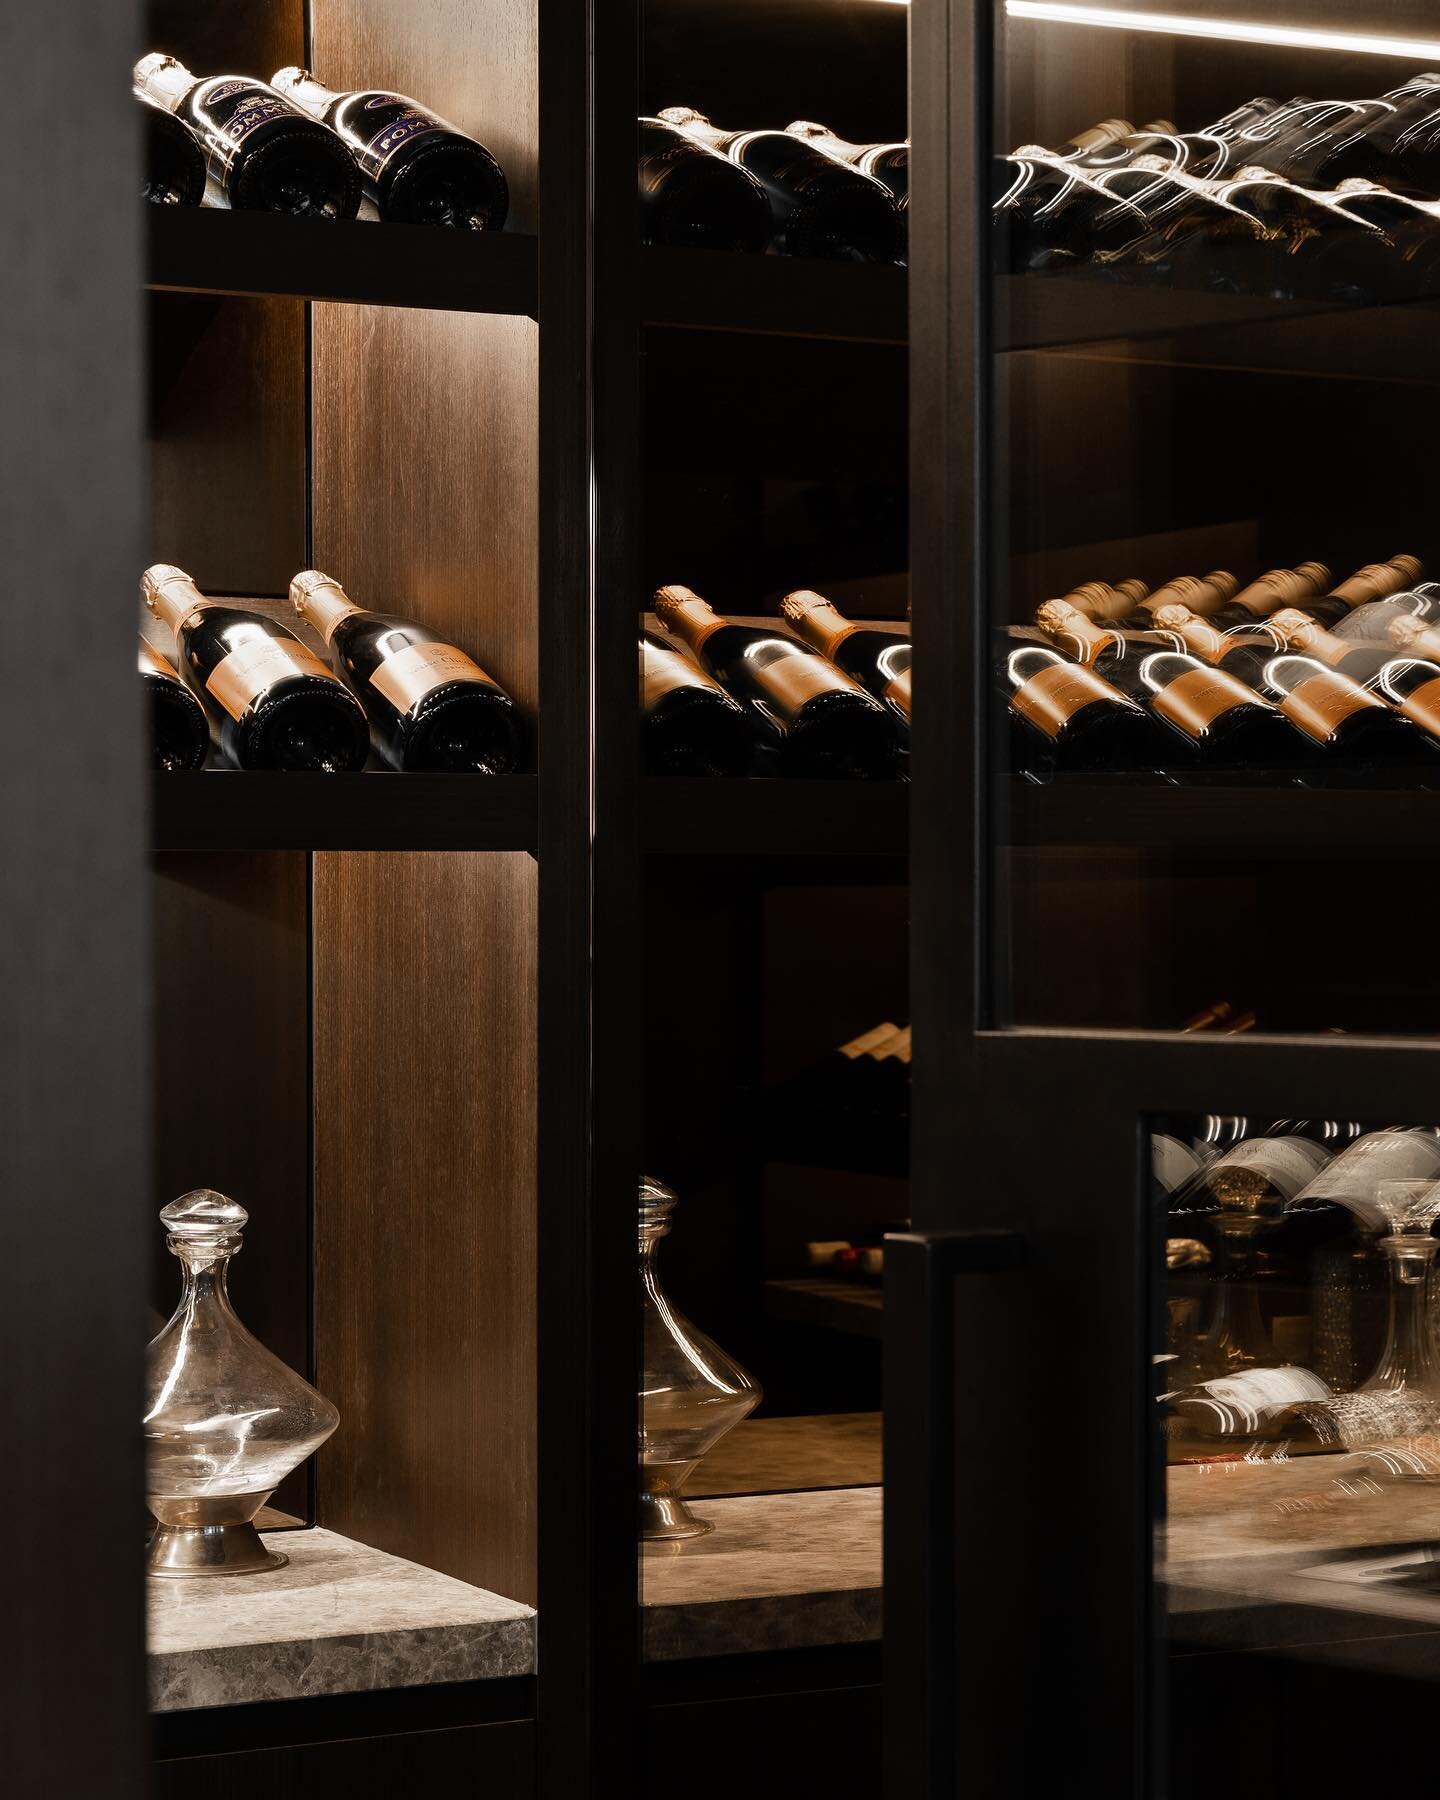 Sitting behind a custom steel door with refrigerated conditions our #ParkCellar project effortlessly showcases our client&rsquo;s wine collection- perched on chocolate veneer shelves and limestone, lit with a warm glow.